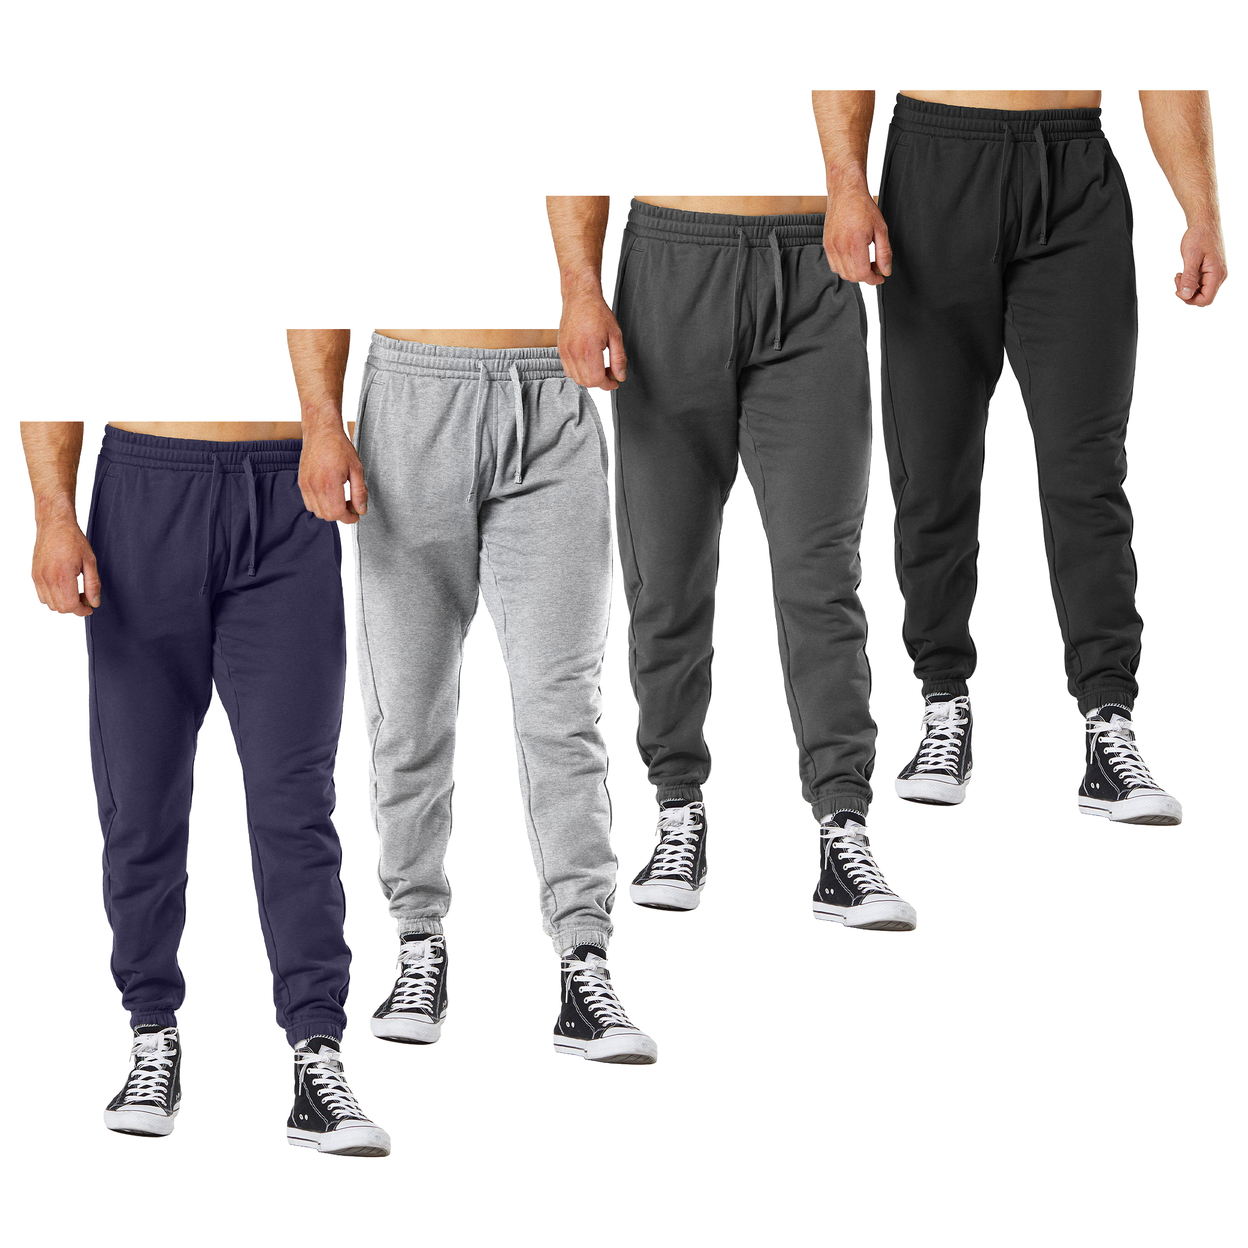 Multi-Pack: Men's Ultra-Soft Cozy Winter Warm Casual Fleece-Lined Sweatpants Jogger - 3-pack, Small